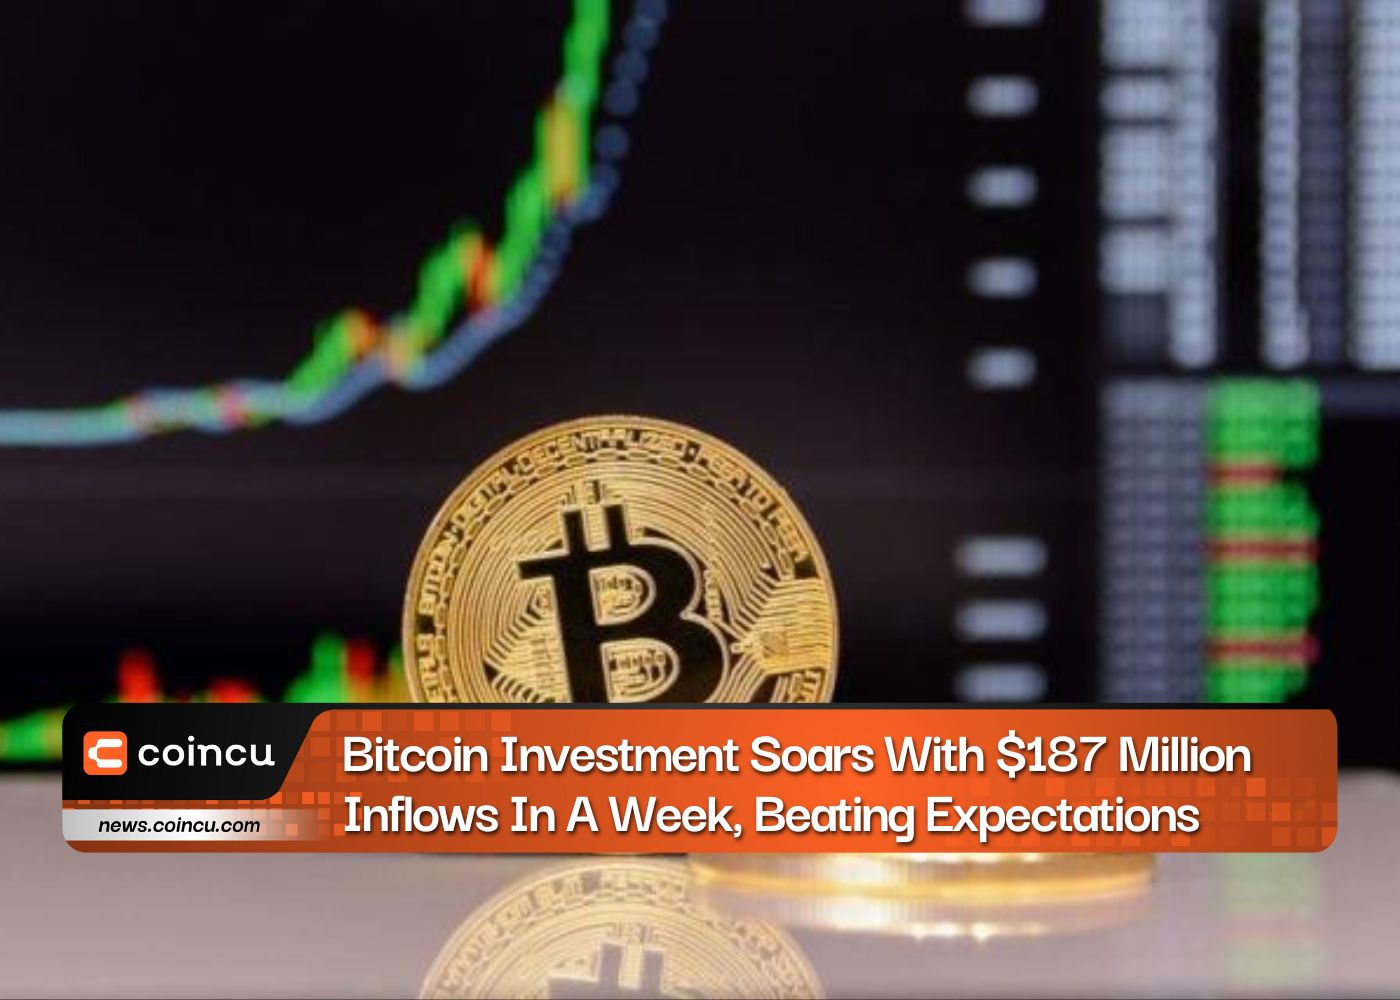 Bitcoin Investment Soars With $187 Million Inflows In A Week, Beating Expectations